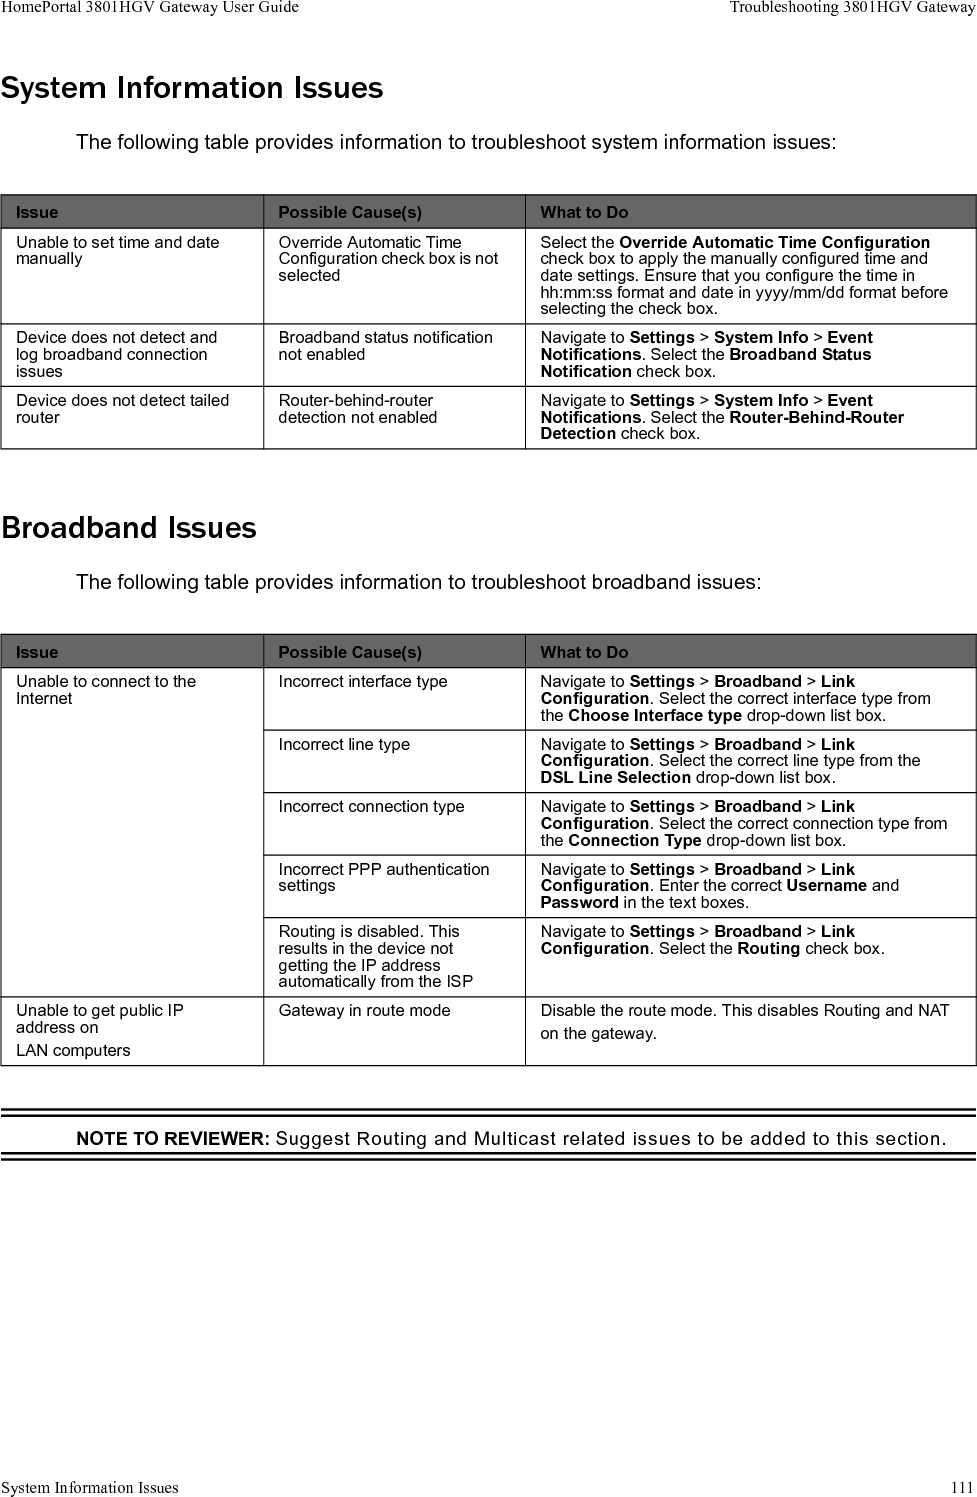 System Information Issues 111HomePortal 3801HGV Gateway User Guide Troubleshooting 3801HGV GatewaySystem Information IssuesThe following table provides information to troubleshoot system information issues:Broadband IssuesThe following table provides information to troubleshoot broadband issues:NOTE TO REVIEWER: Suggest Routing and Multicast related issues to be added to this section.Issue Possible Cause(s) What to DoUnable to set time and date manuallyOverride Automatic Time Configuration check box is not selectedSelect the Override Automatic Time Configuration check box to apply the manually configured time and date settings. Ensure that you configure the time in hh:mm:ss format and date in yyyy/mm/dd format before selecting the check box.Device does not detect and log broadband connection issuesBroadband status notification not enabledNavigate to Settings &gt; System Info &gt; Event Notifications. Select the Broadband Status Notification check box.Device does not detect tailed routerRouter-behind-router detection not enabledNavigate to Settings &gt; System Info &gt; Event Notifications. Select the Router-Behind-Router Detection check box.Issue Possible Cause(s) What to DoUnable to connect to the InternetIncorrect interface type Navigate to Settings &gt; Broadband &gt; Link Configuration. Select the correct interface type from the Choose Interface type drop-down list box.Incorrect line type Navigate to Settings &gt; Broadband &gt; Link Configuration. Select the correct line type from the DSL Line Selection drop-down list box.Incorrect connection type Navigate to Settings &gt; Broadband &gt; Link Configuration. Select the correct connection type from the Connection Type drop-down list box.Incorrect PPP authentication settingsNavigate to Settings &gt; Broadband &gt; Link Configuration. Enter the correct Username and Password in the text boxes.Routing is disabled. This results in the device not getting the IP address automatically from the ISPNavigate to Settings &gt; Broadband &gt; Link Configuration. Select the Routing check box.Unable to get public IP address onLAN computersGateway in route mode Disable the route mode. This disables Routing and NATon the gateway.